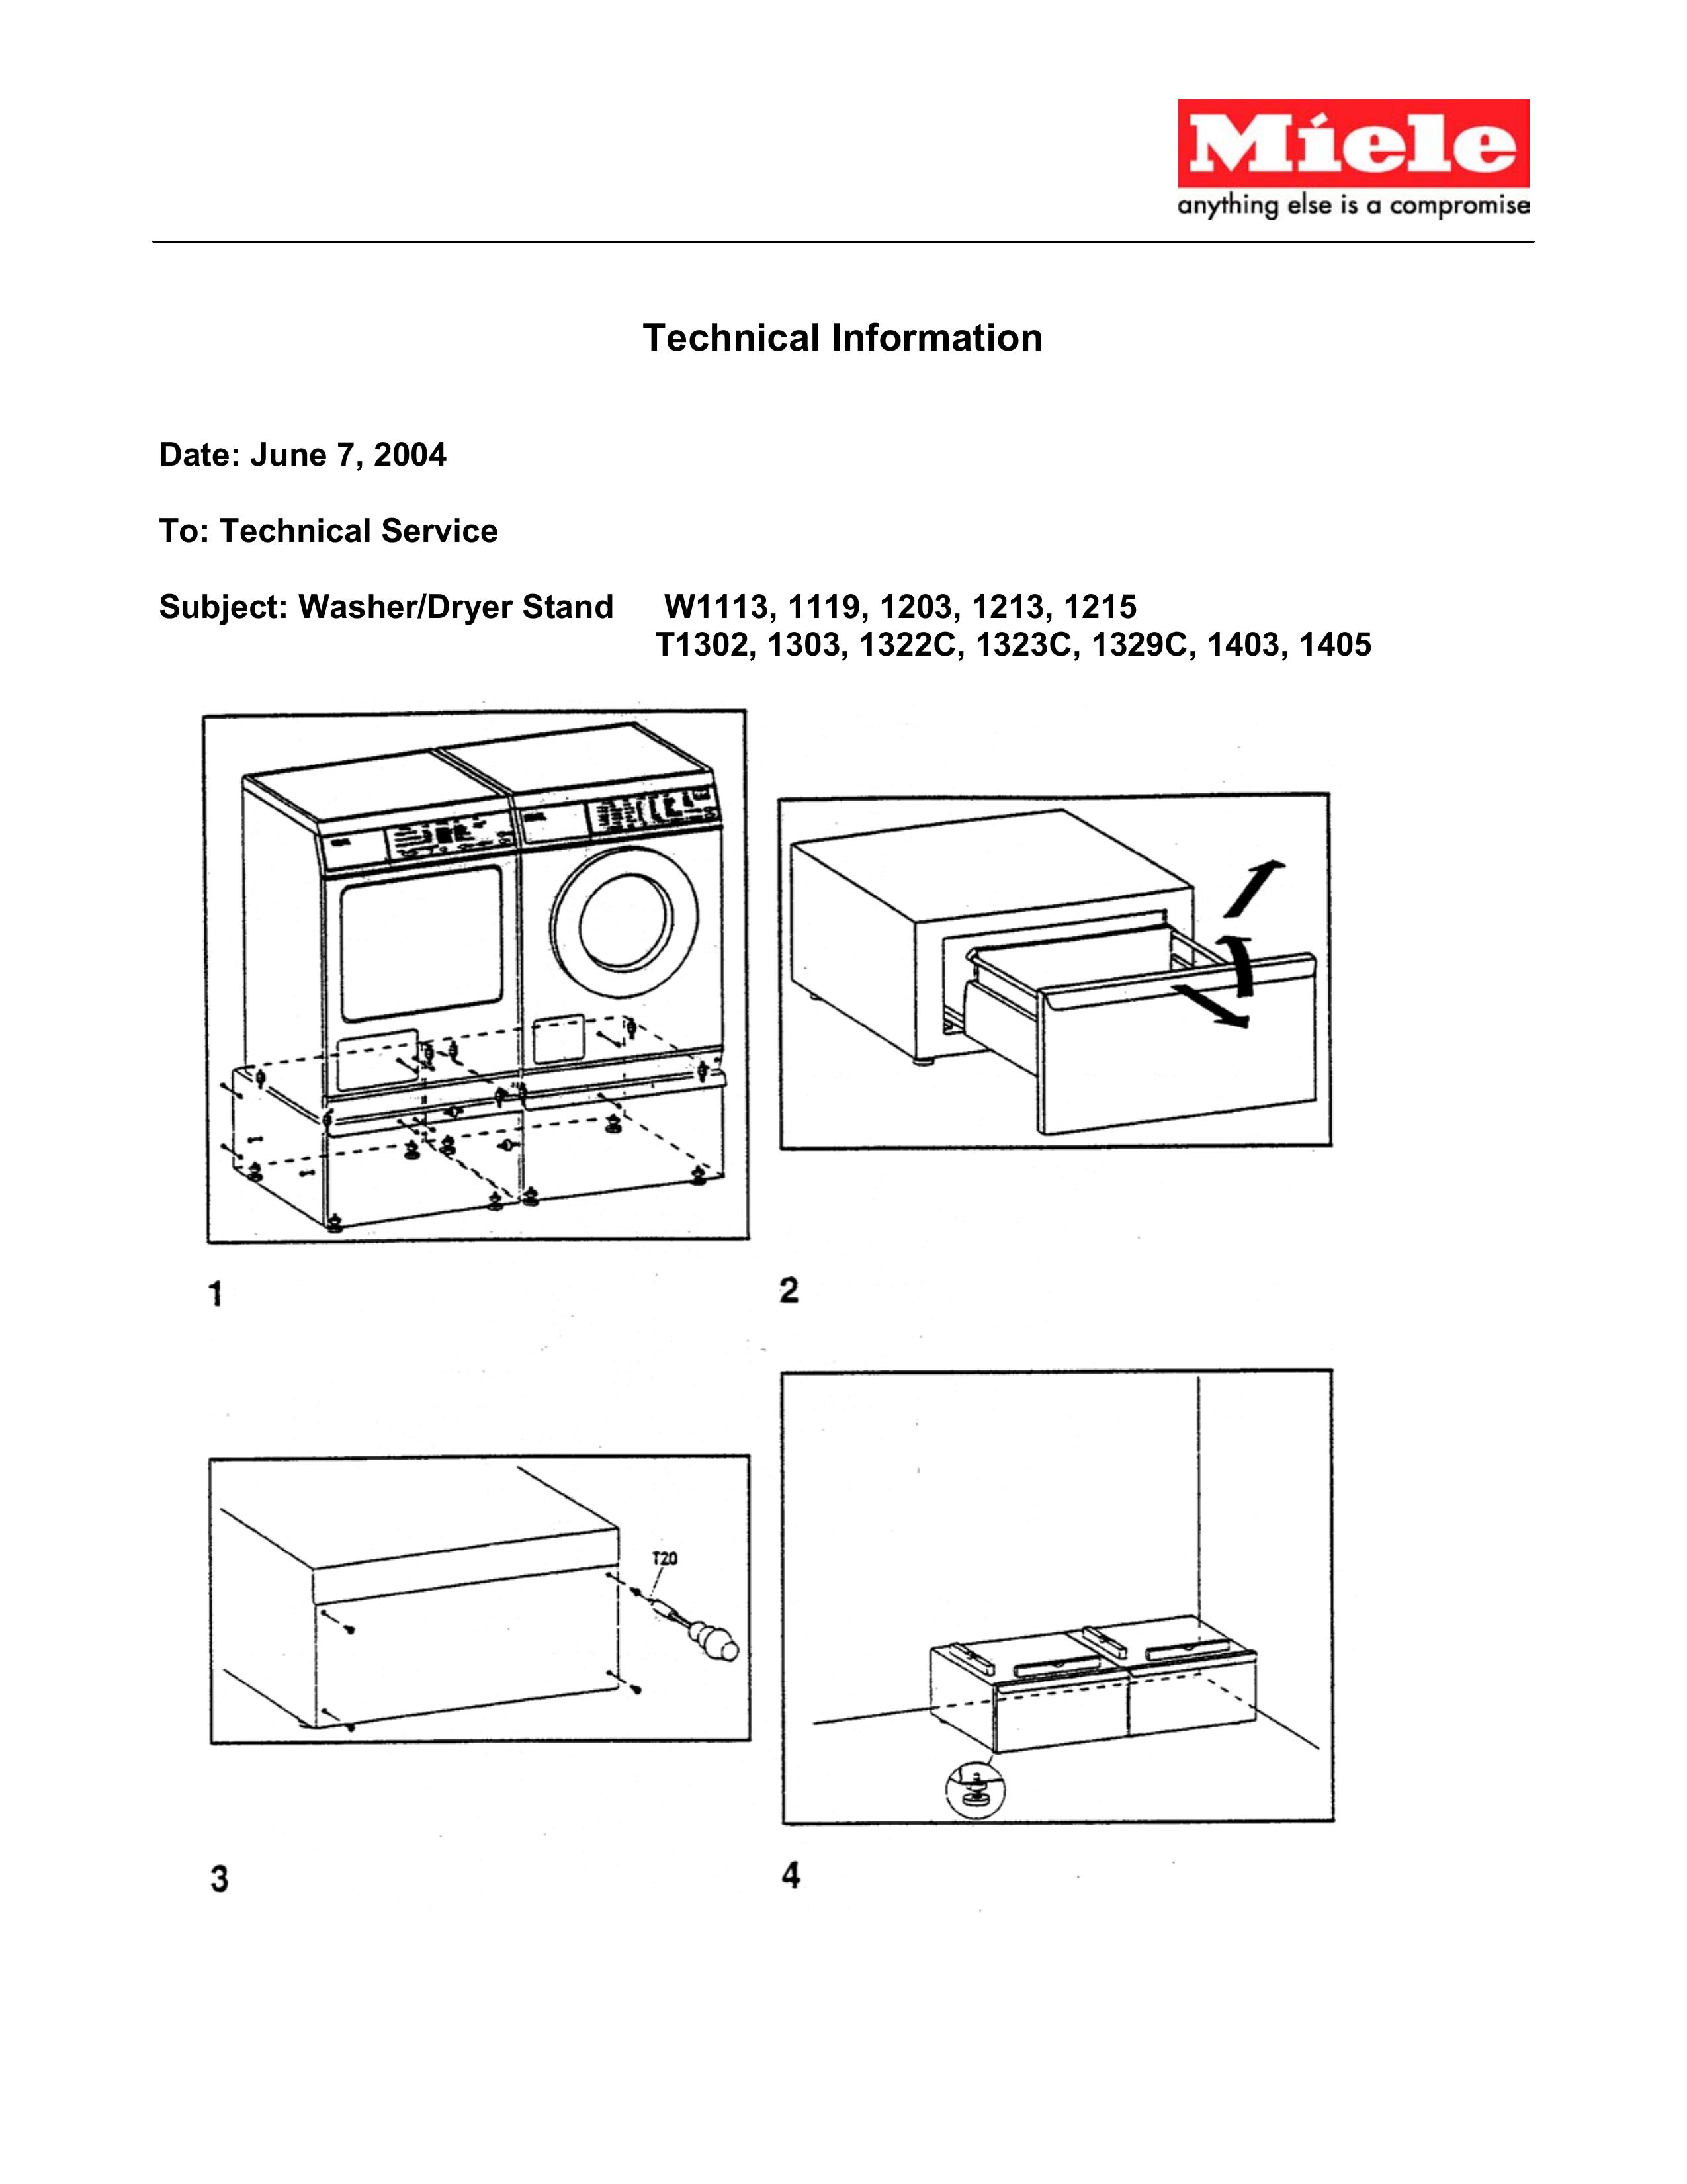 Miele T1322C Washer Accessories User Manual